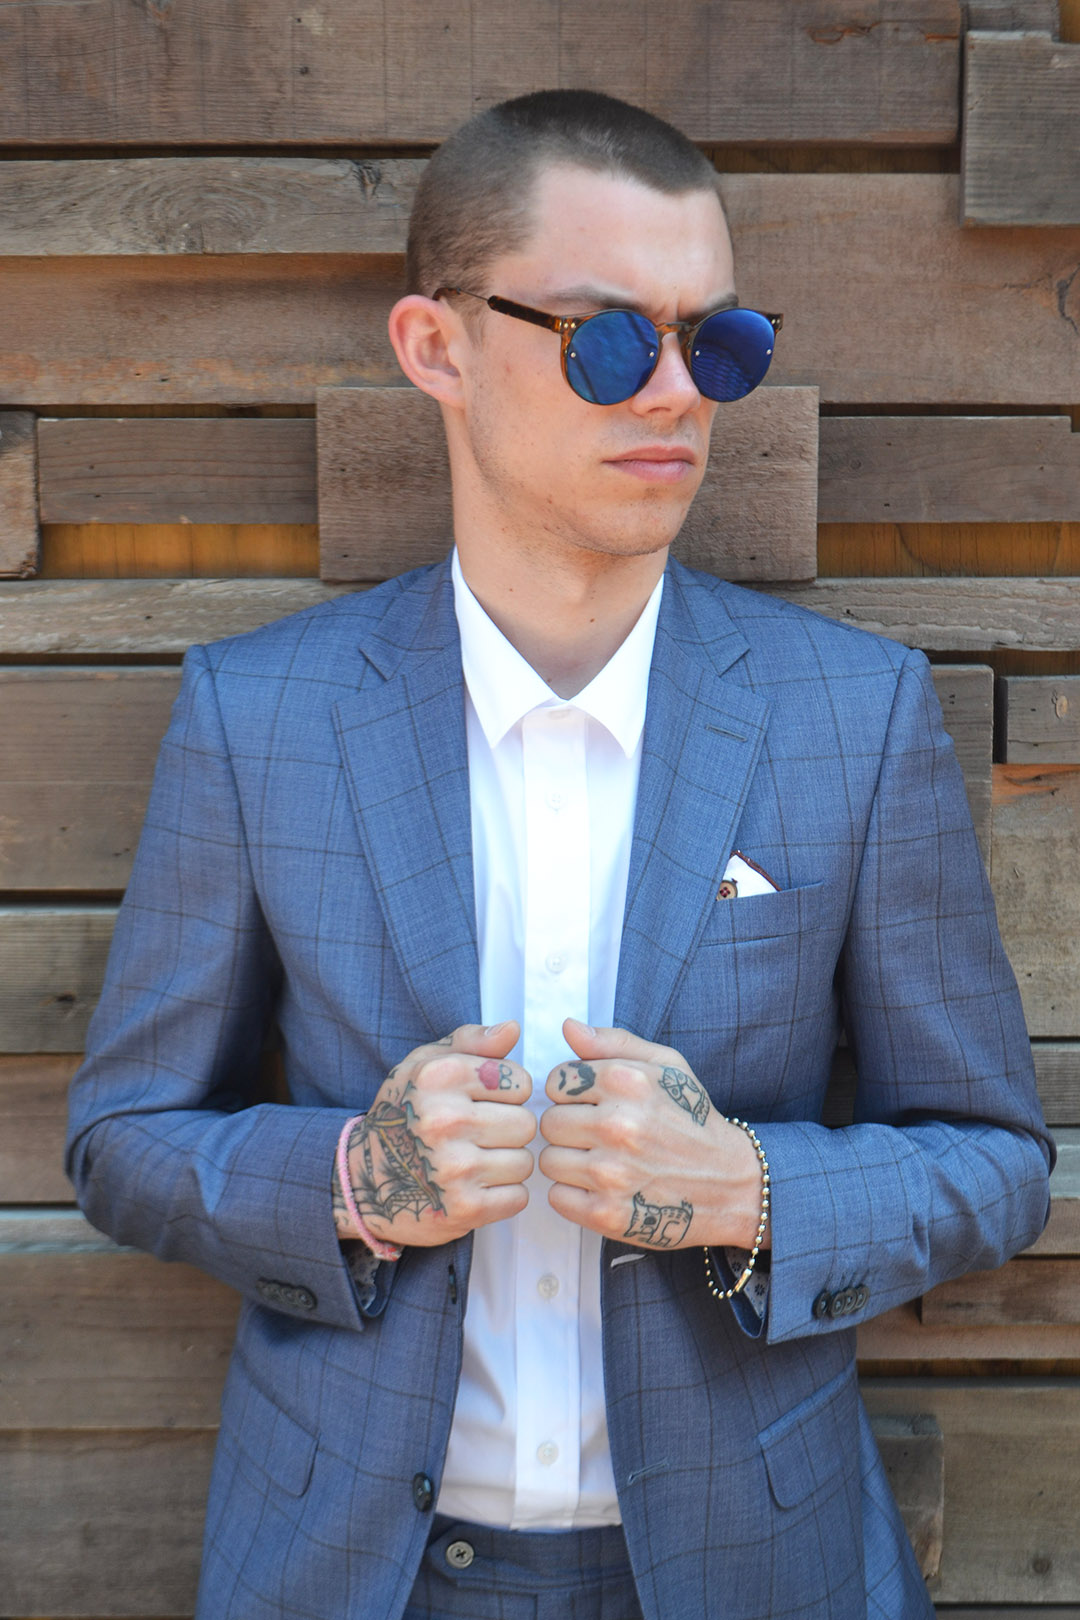 White short sleeve shirt with suit